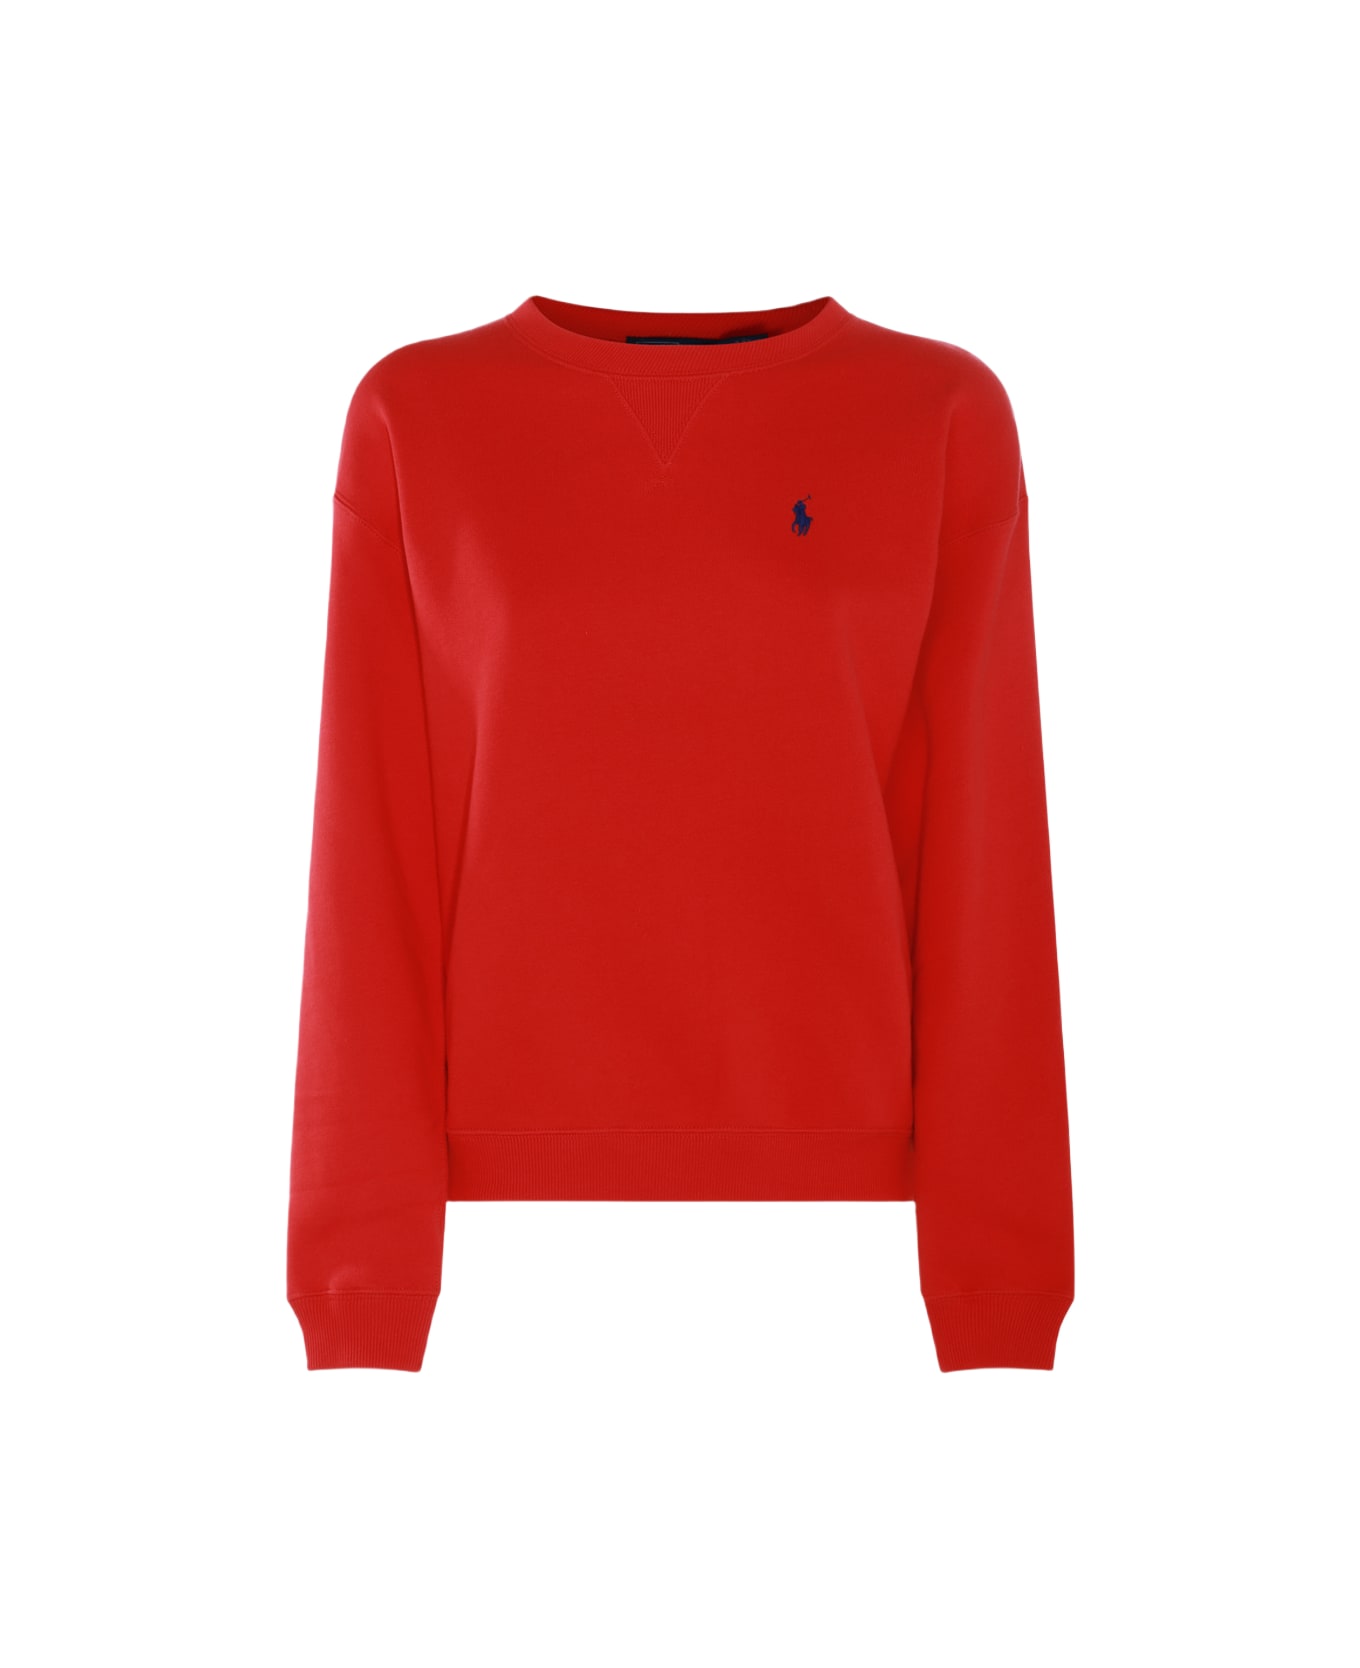 Polo Ralph Lauren Red And Blue Cotton Blend Sweatshirt - BRIGHT HIBISCUS